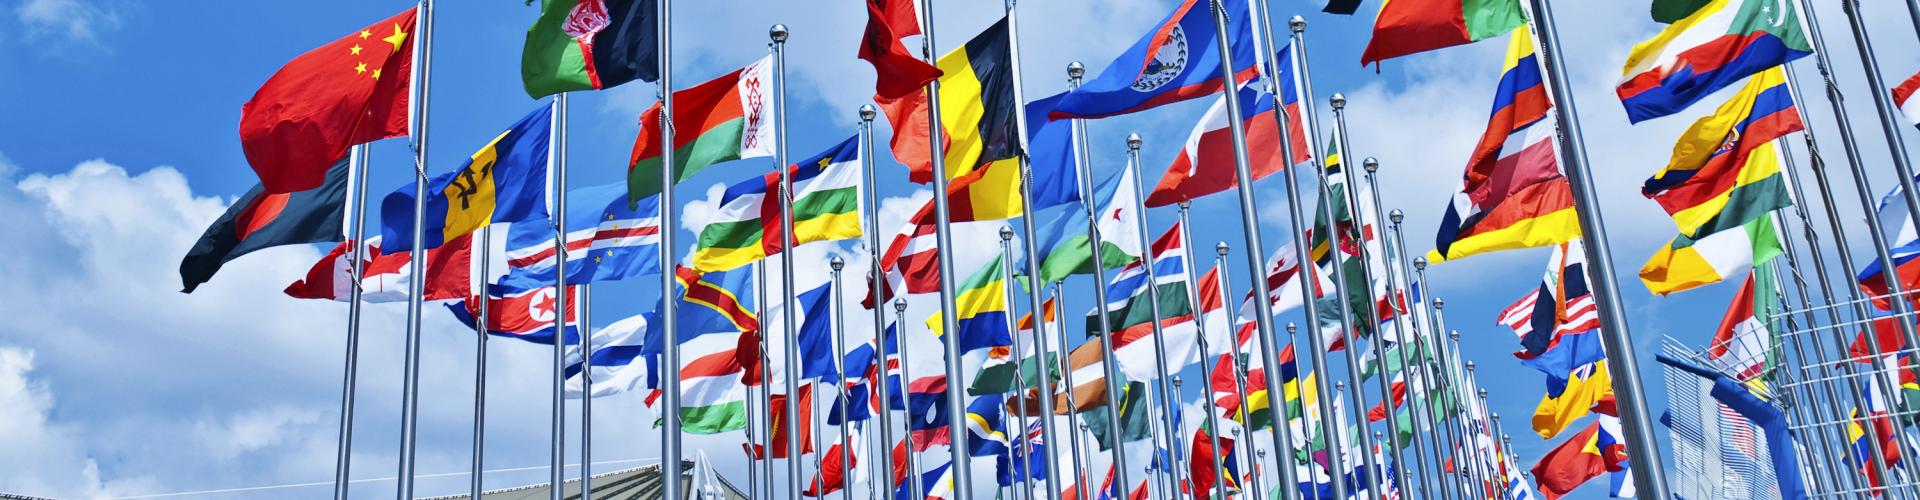 Collection display of international flags waving in the wind